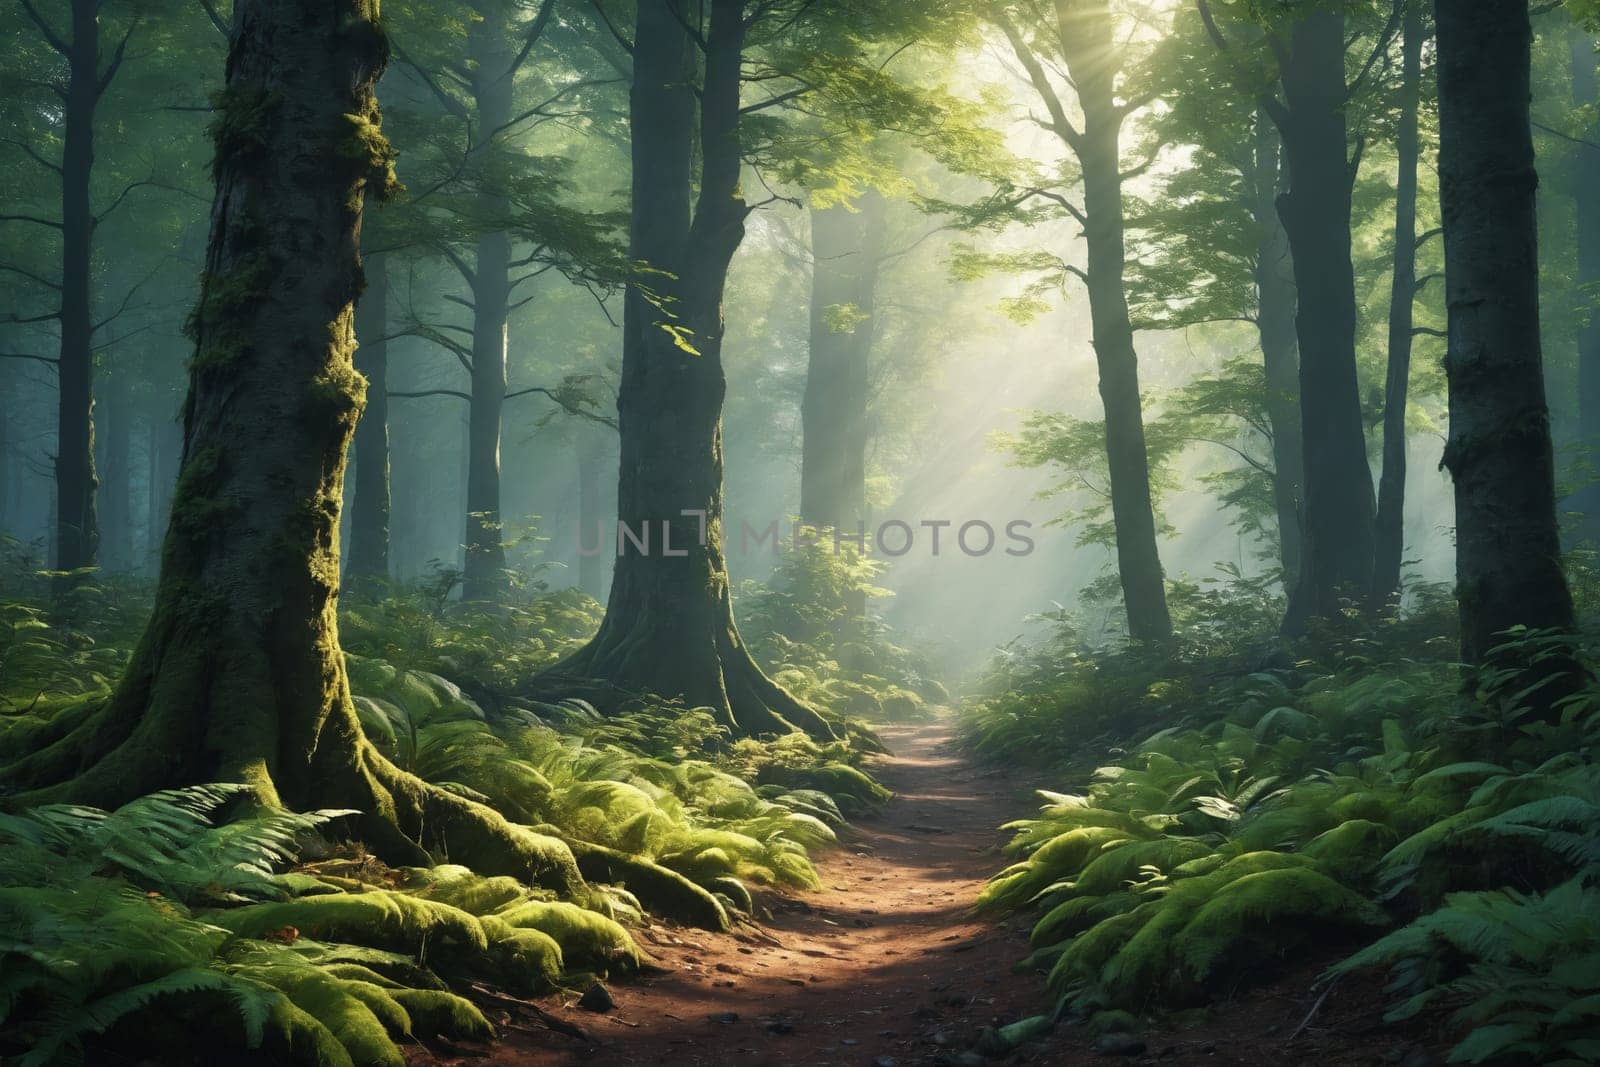 Sunbeams and Shadows: A Magical Journey through the Forest by Andre1ns